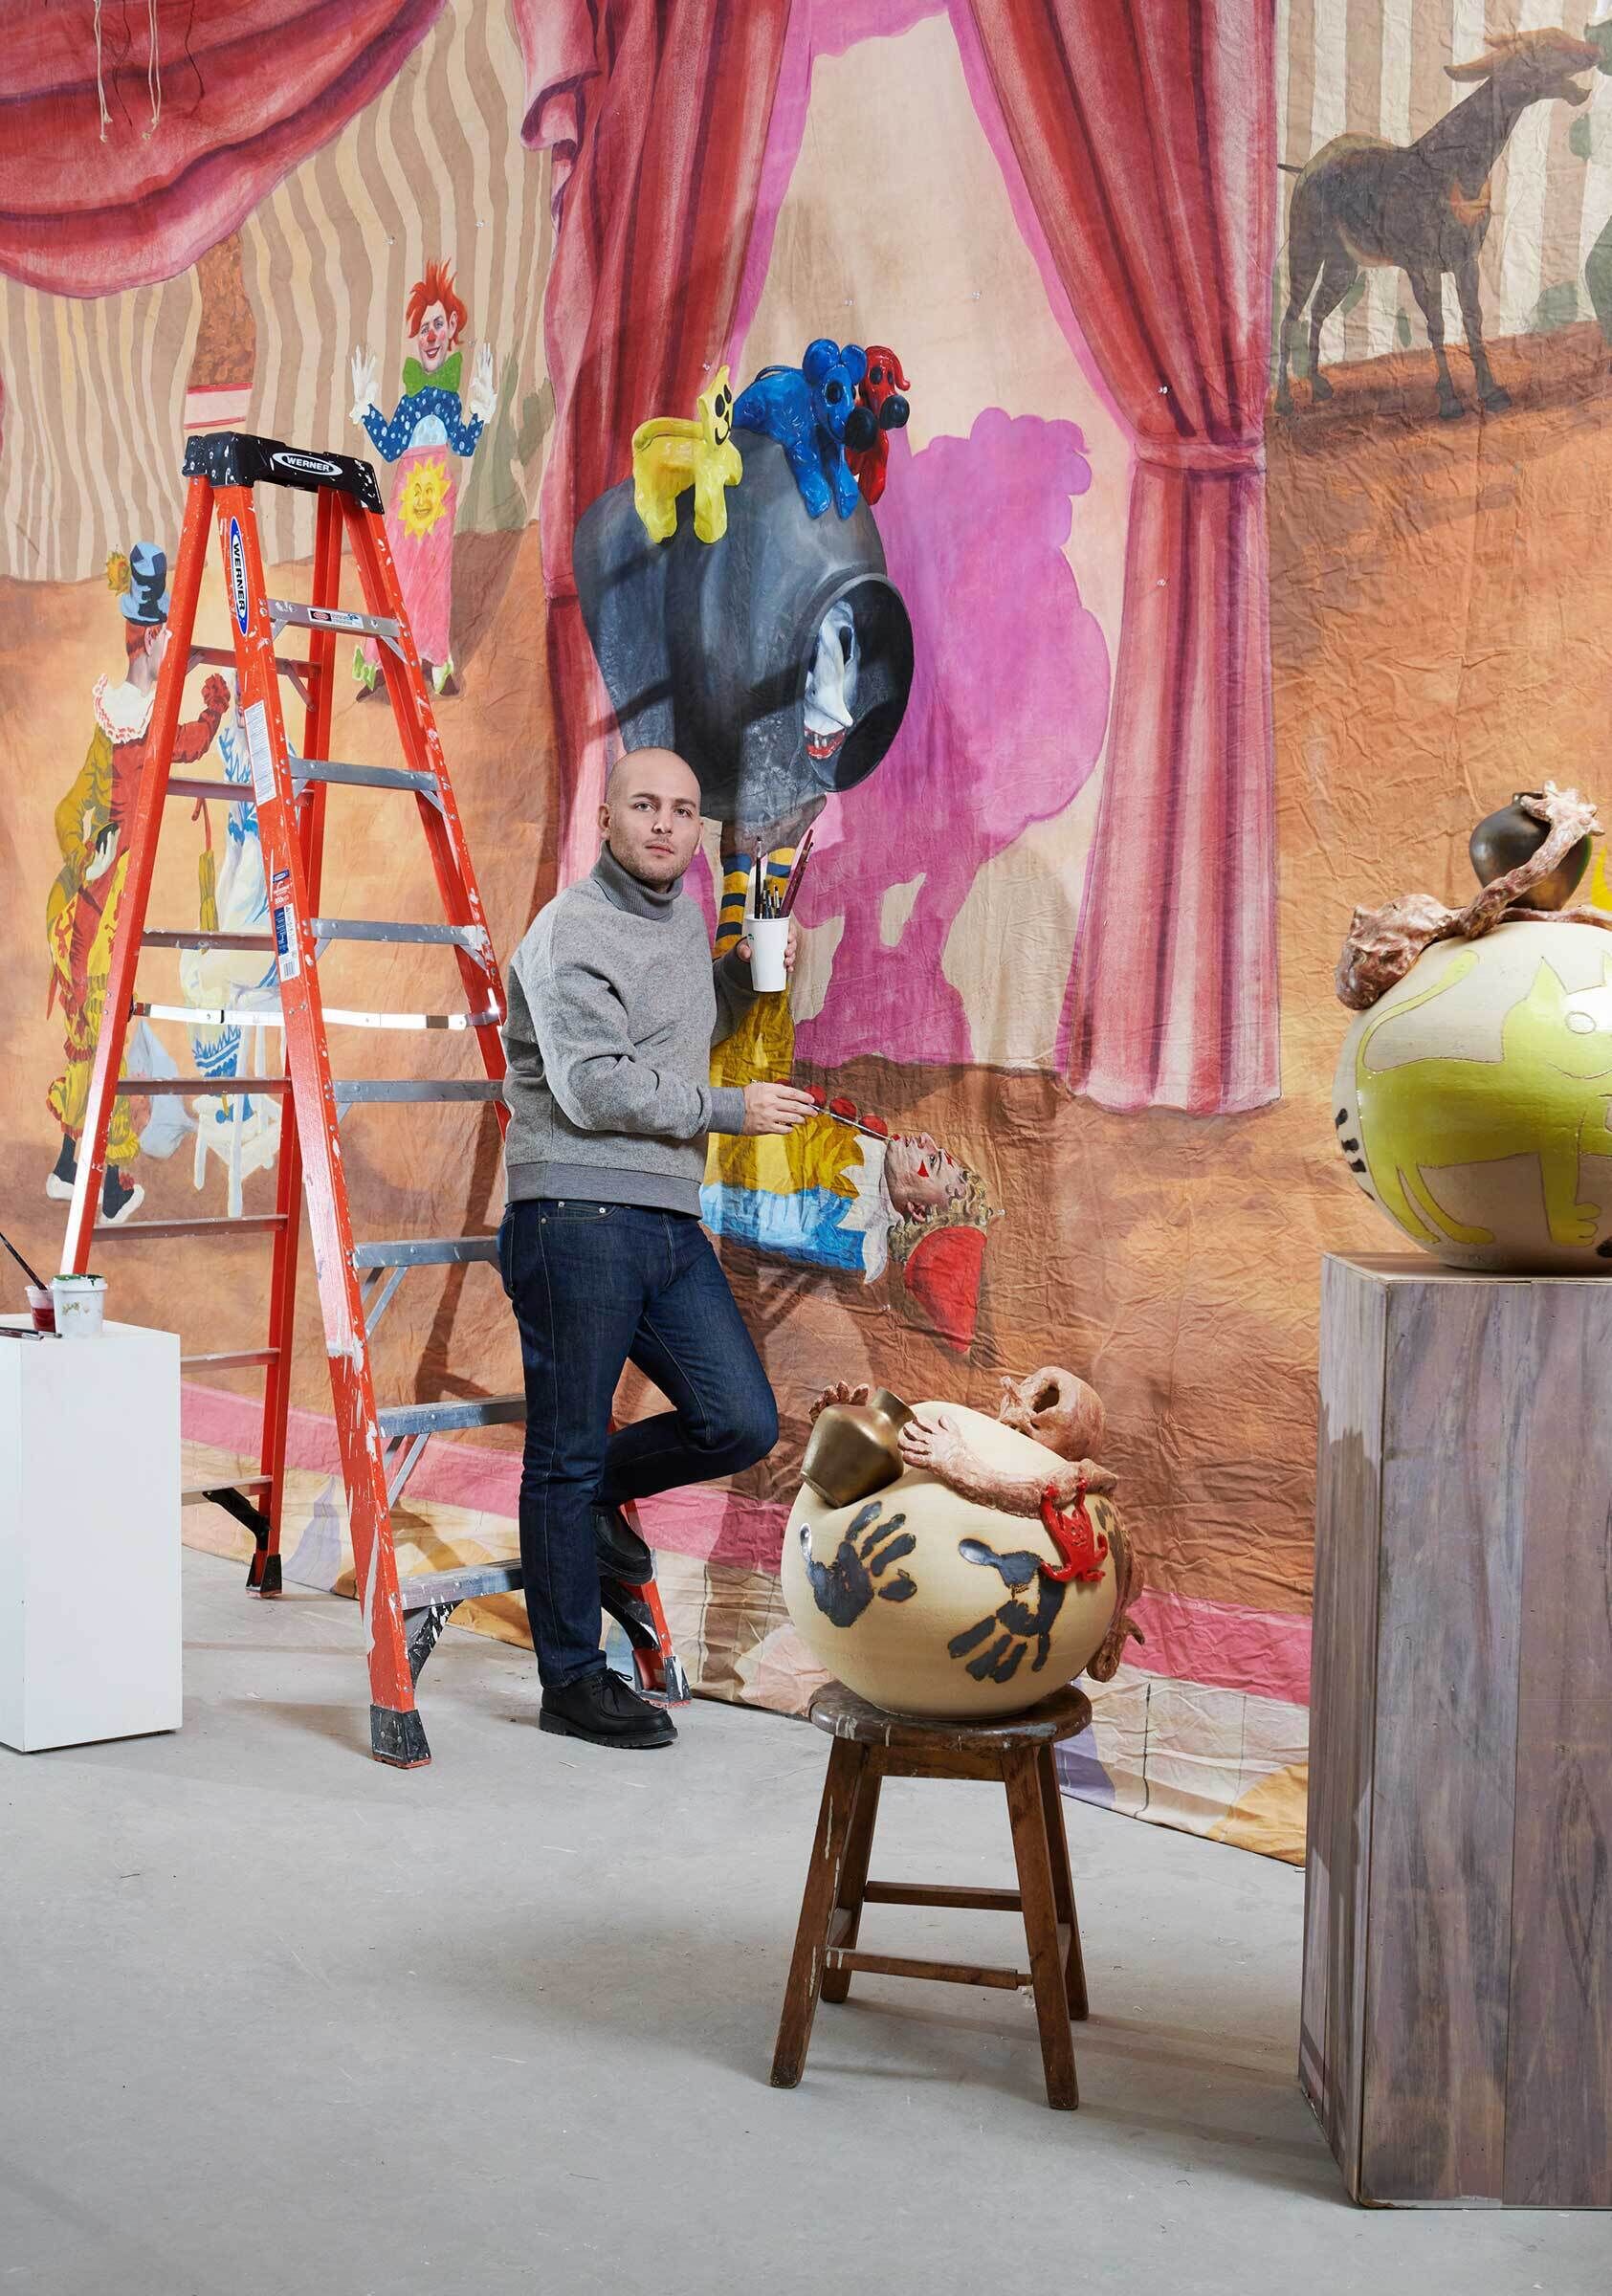 The artist Hadi Falapishi in his Brooklyn studio standing in front of his colorful works and a ladder.